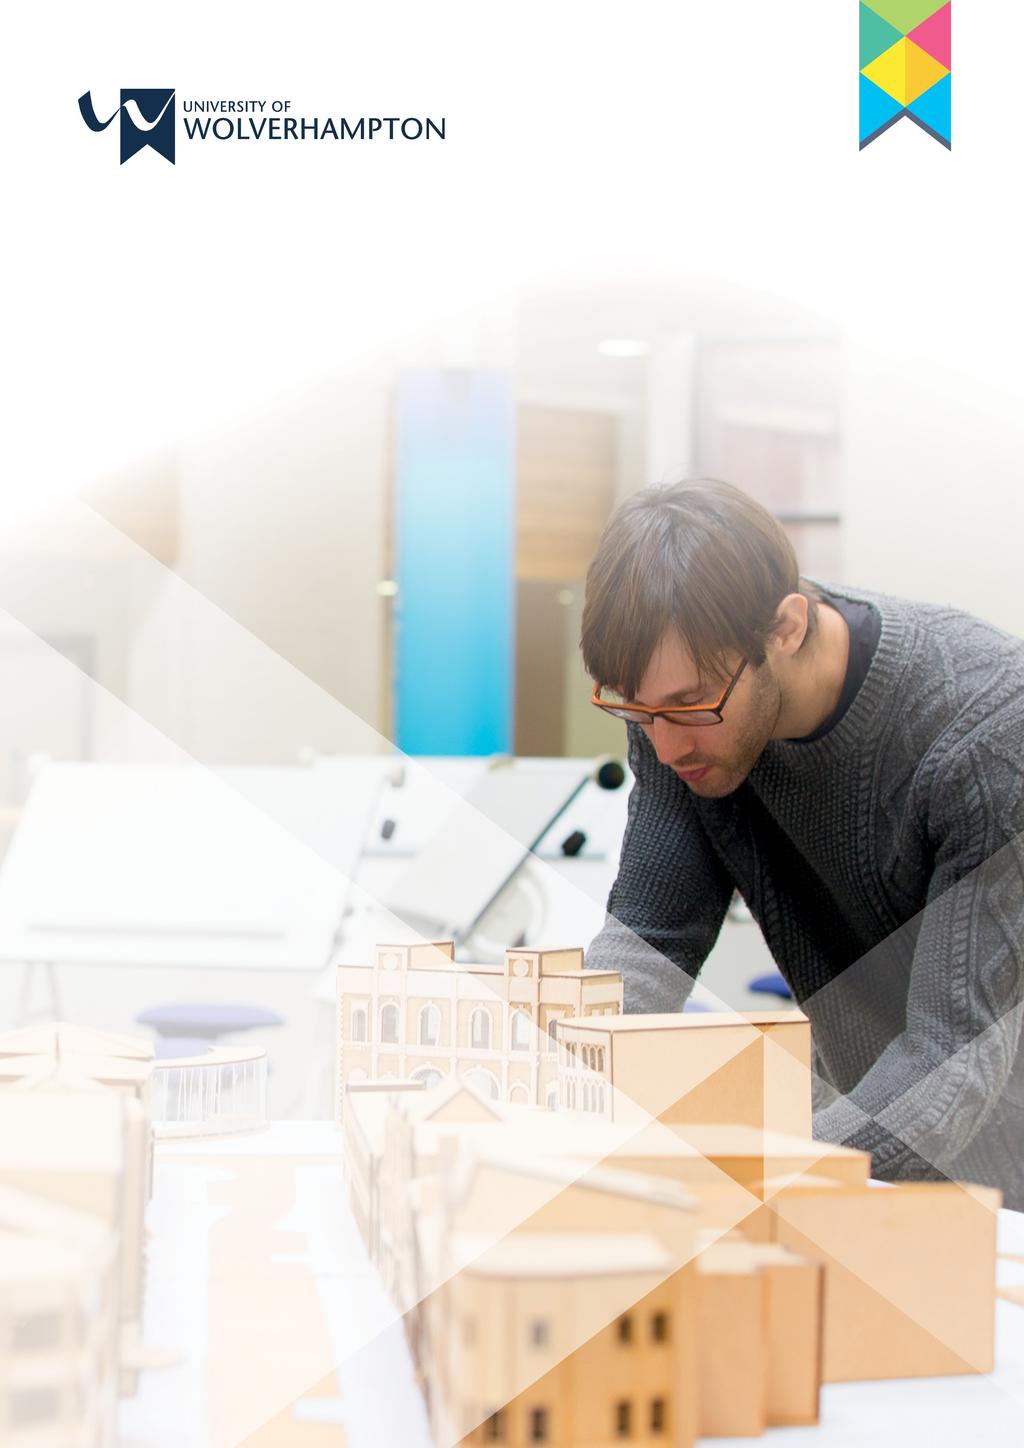 School of Architecture and Built Environment Postgraduate